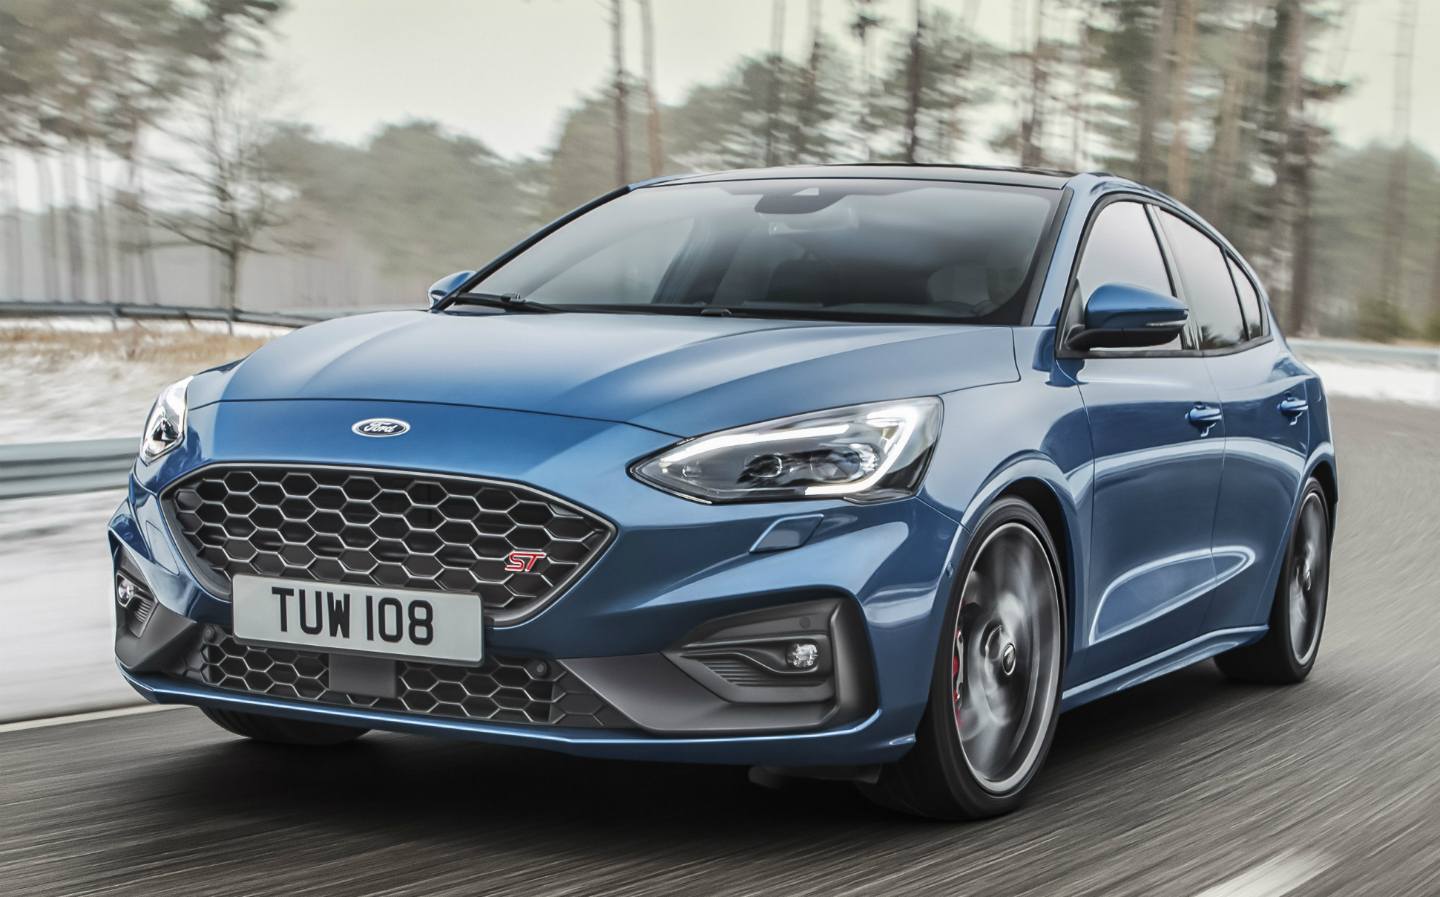 Sunday Times Motor Awards 2019 Best Hot Hatch of the Year. Ford Focus ST